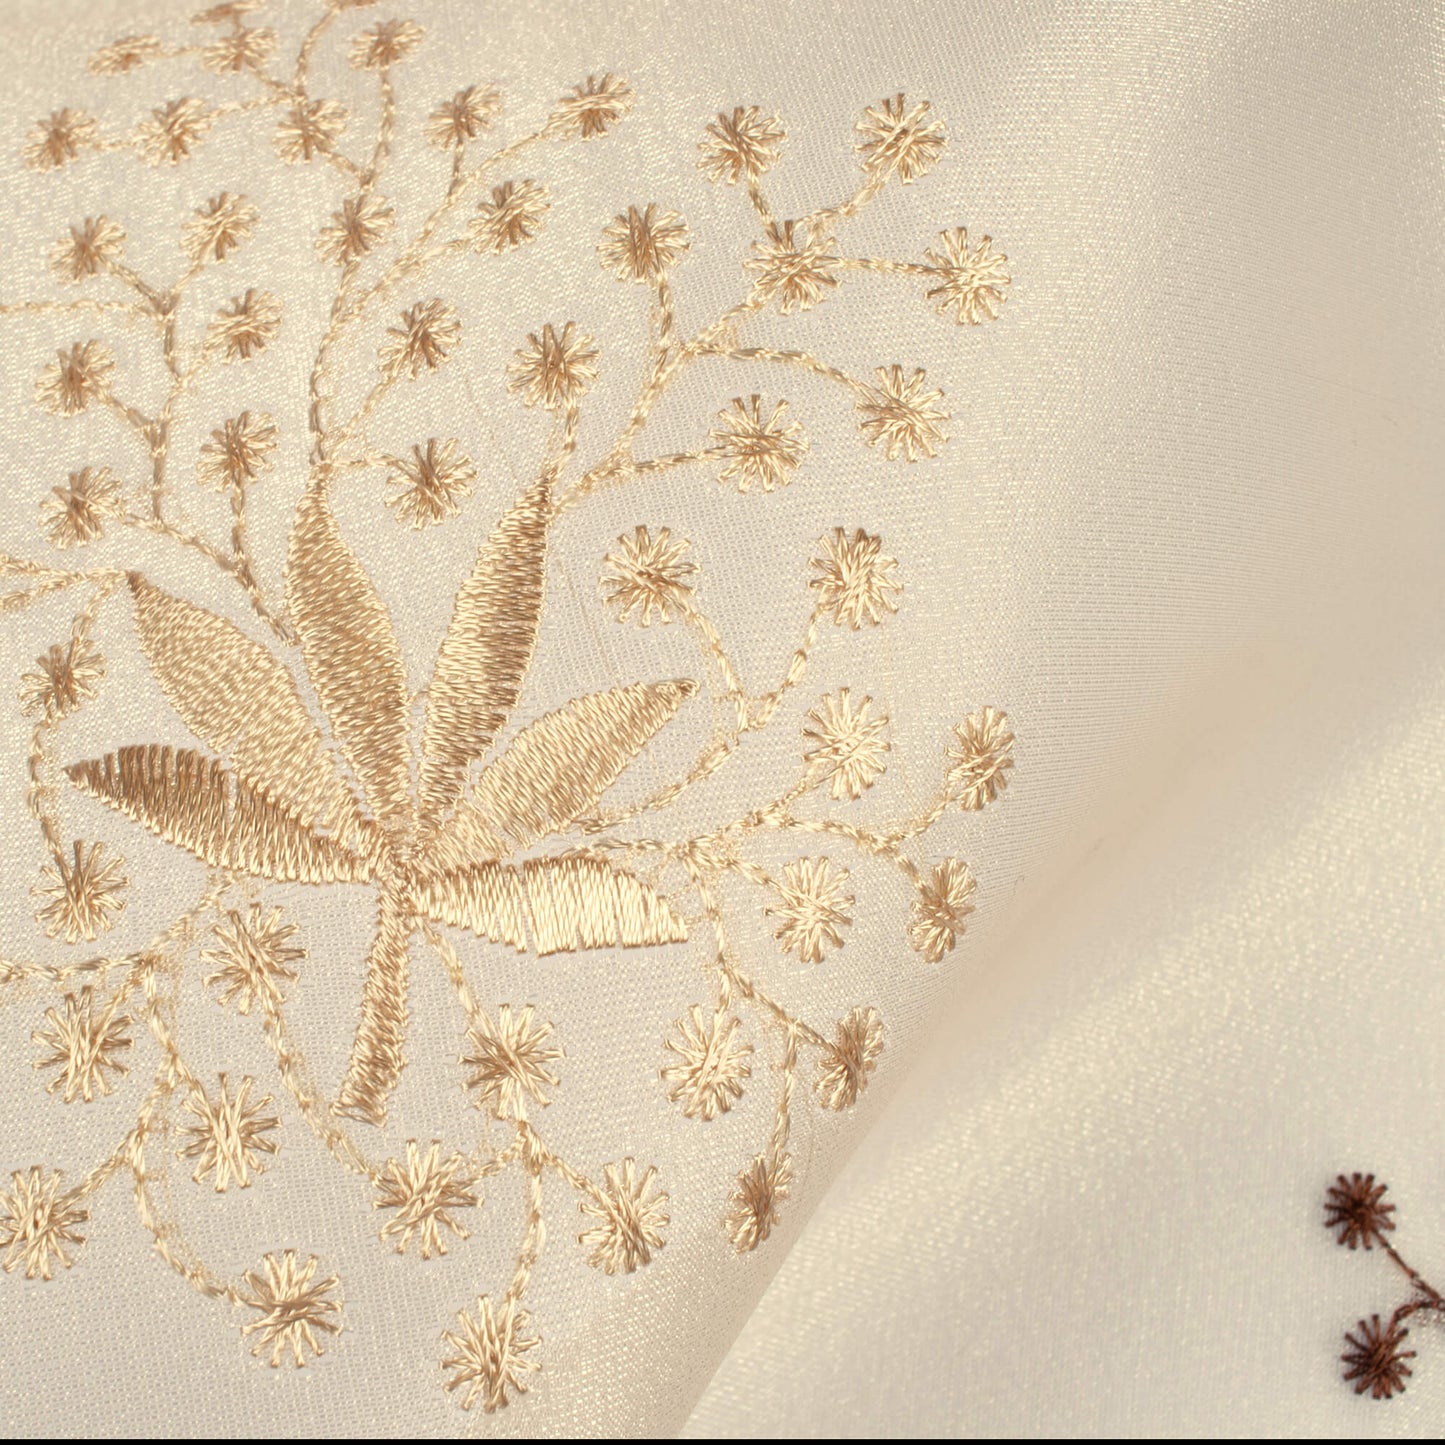 Oatmeal Beige And Coffee Brown Floral Pattern Embroidery Organza Tissue Premium Sheer Fabric (Width 48 Inches)